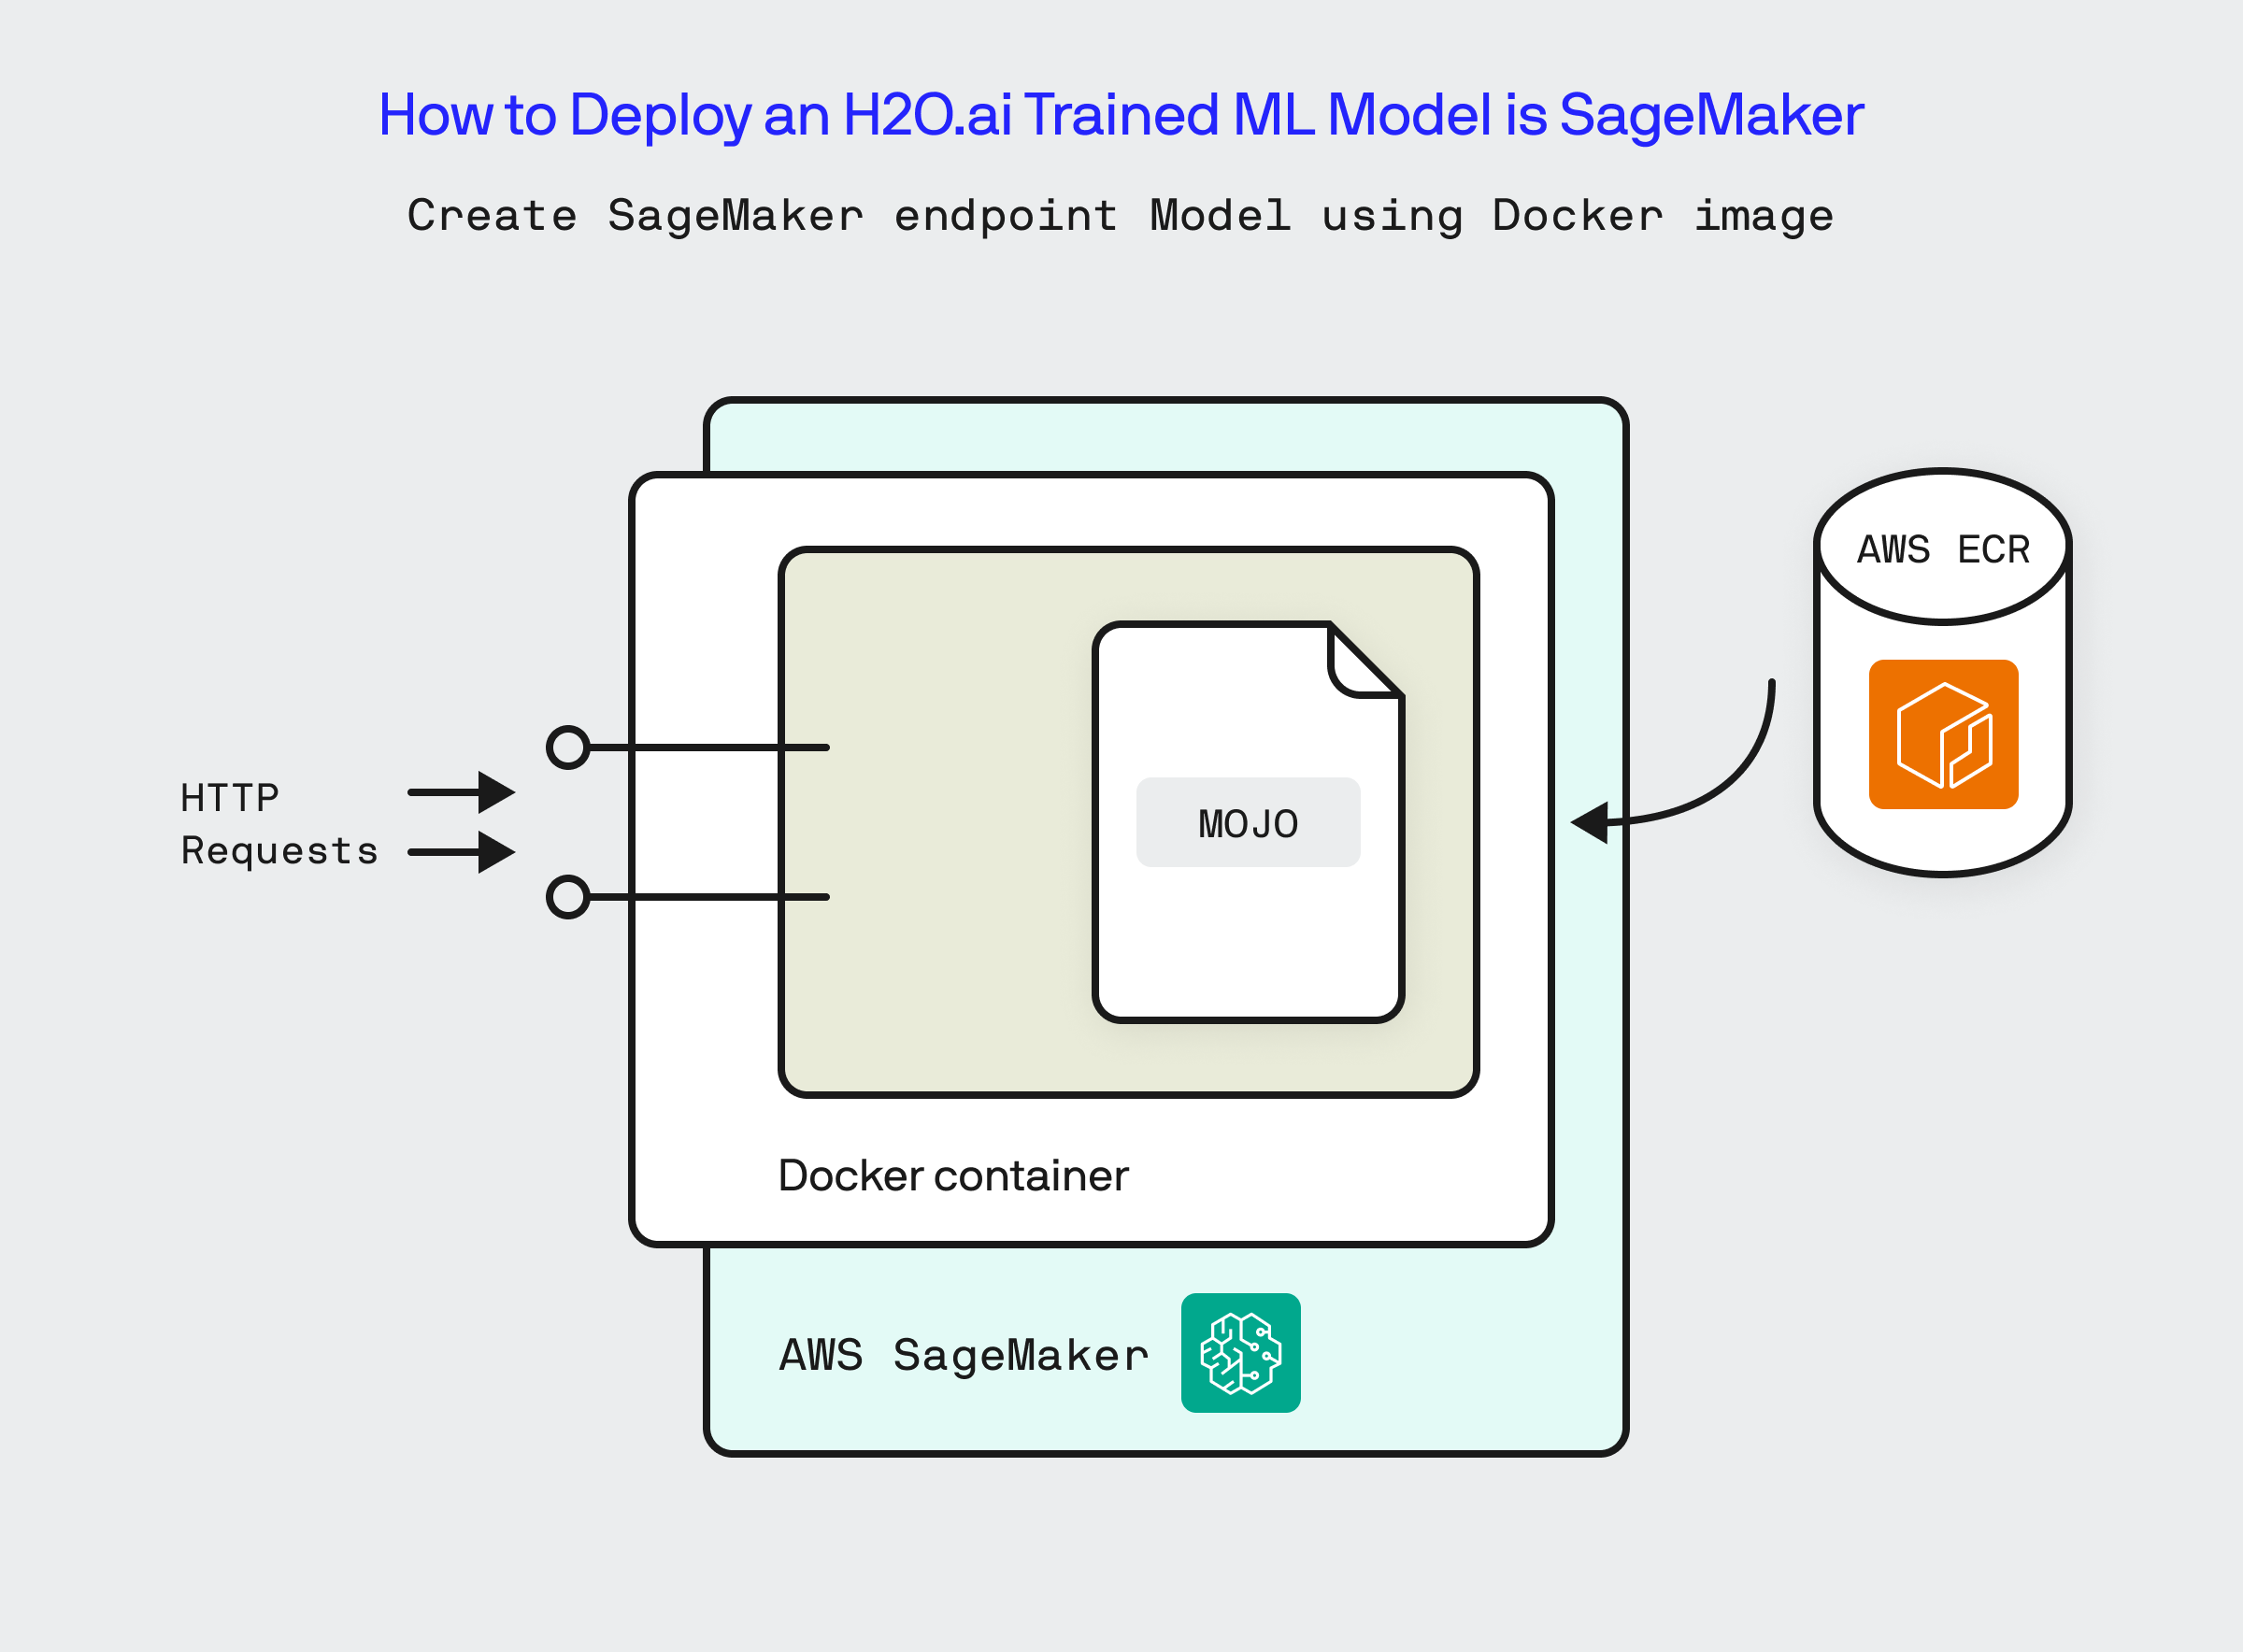 AWS SageMaker will launch our Docker container and pass inference requests sent to the SageMaker Endpoint to the /invocations endpoint in our Fertility Calculator Service running inside the Docker container.